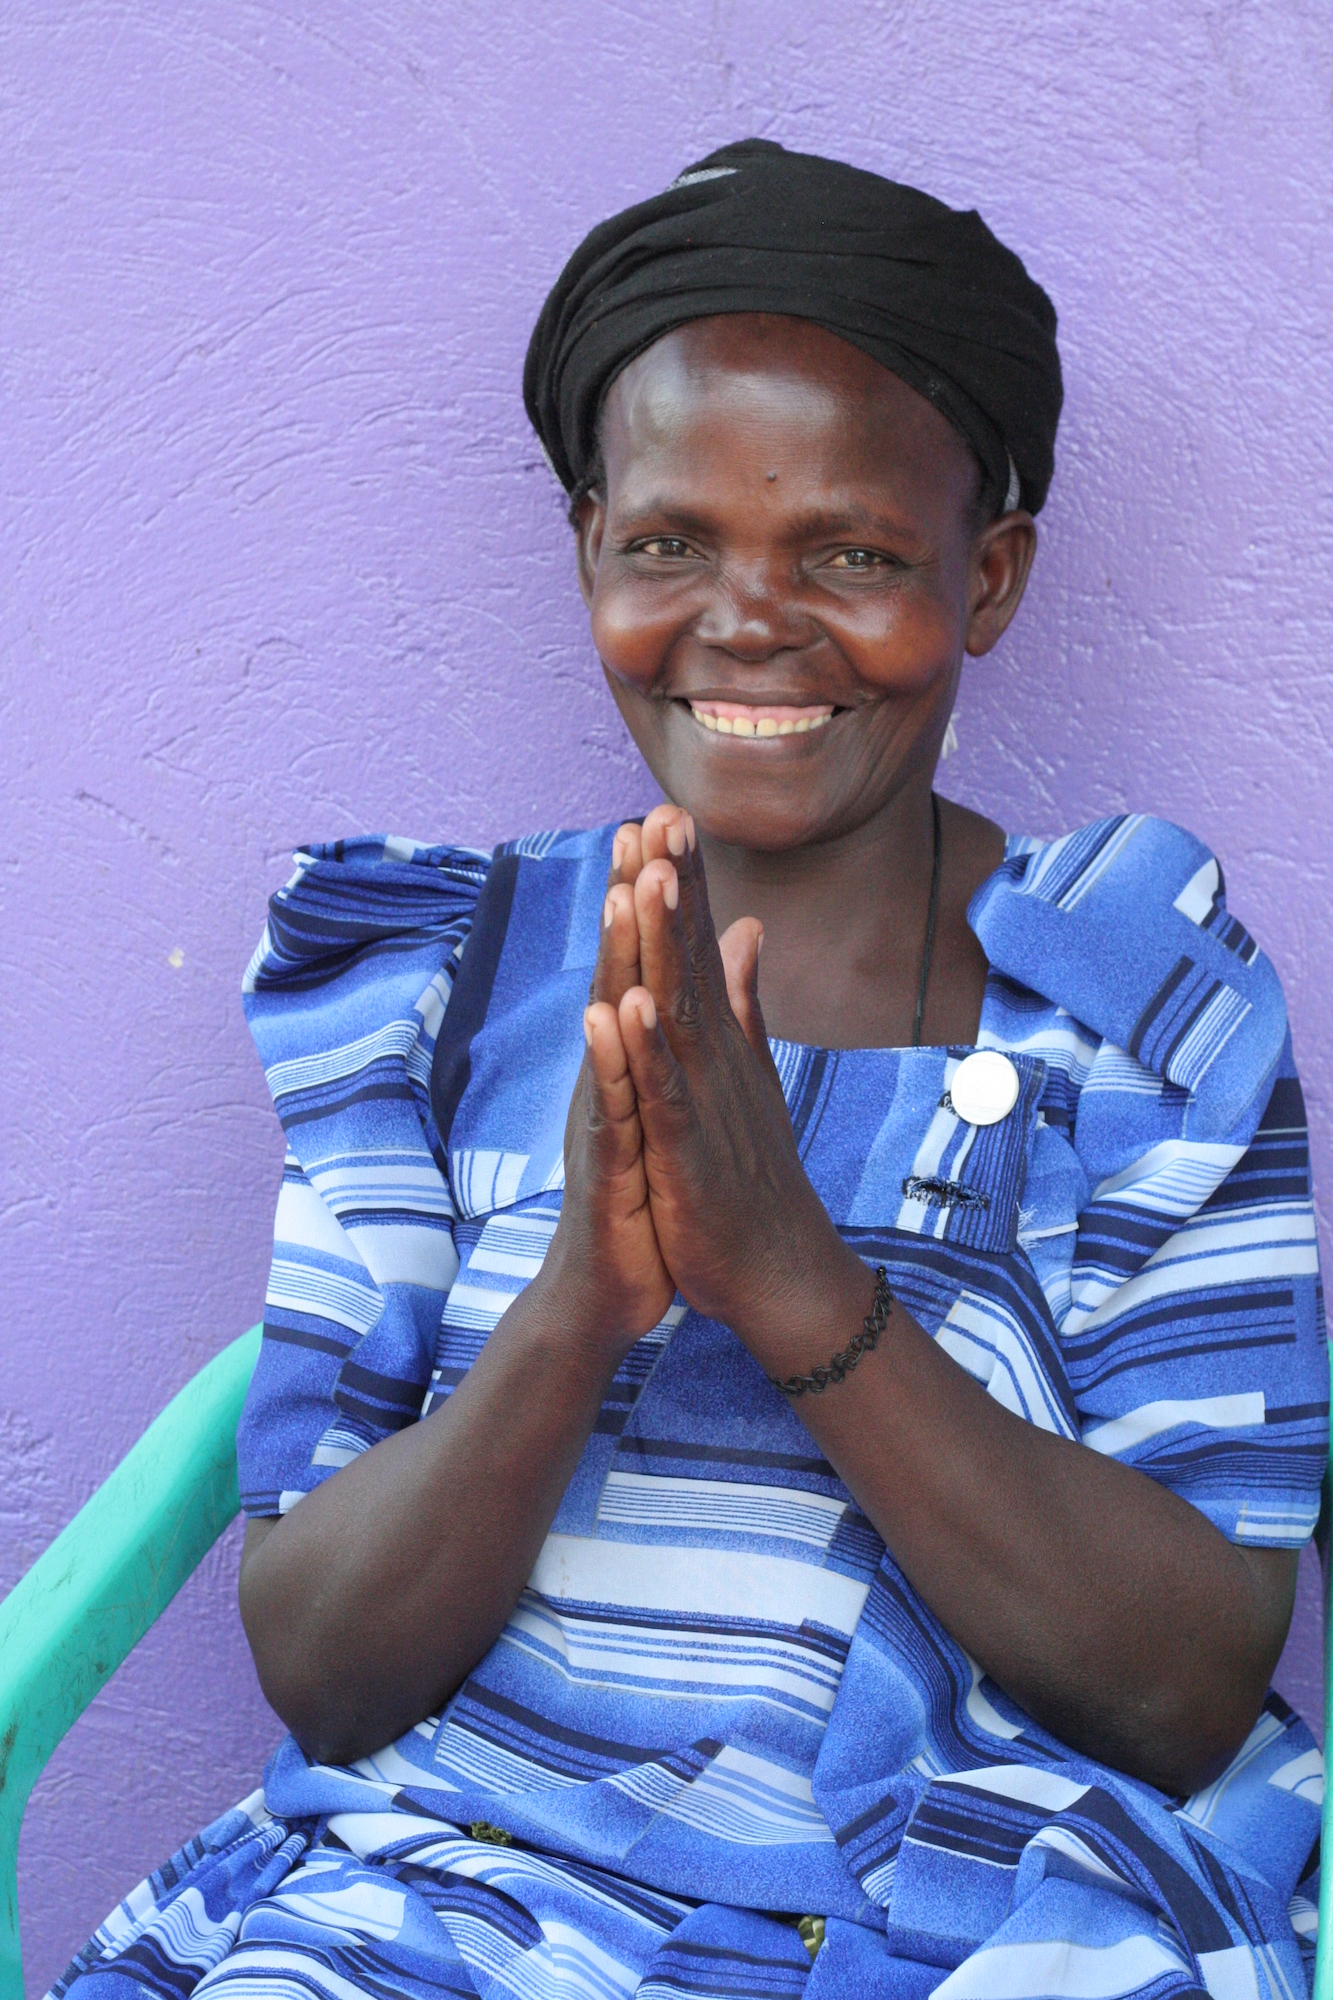 Woman smiling in front of a purple wall with hands raised as in prayer